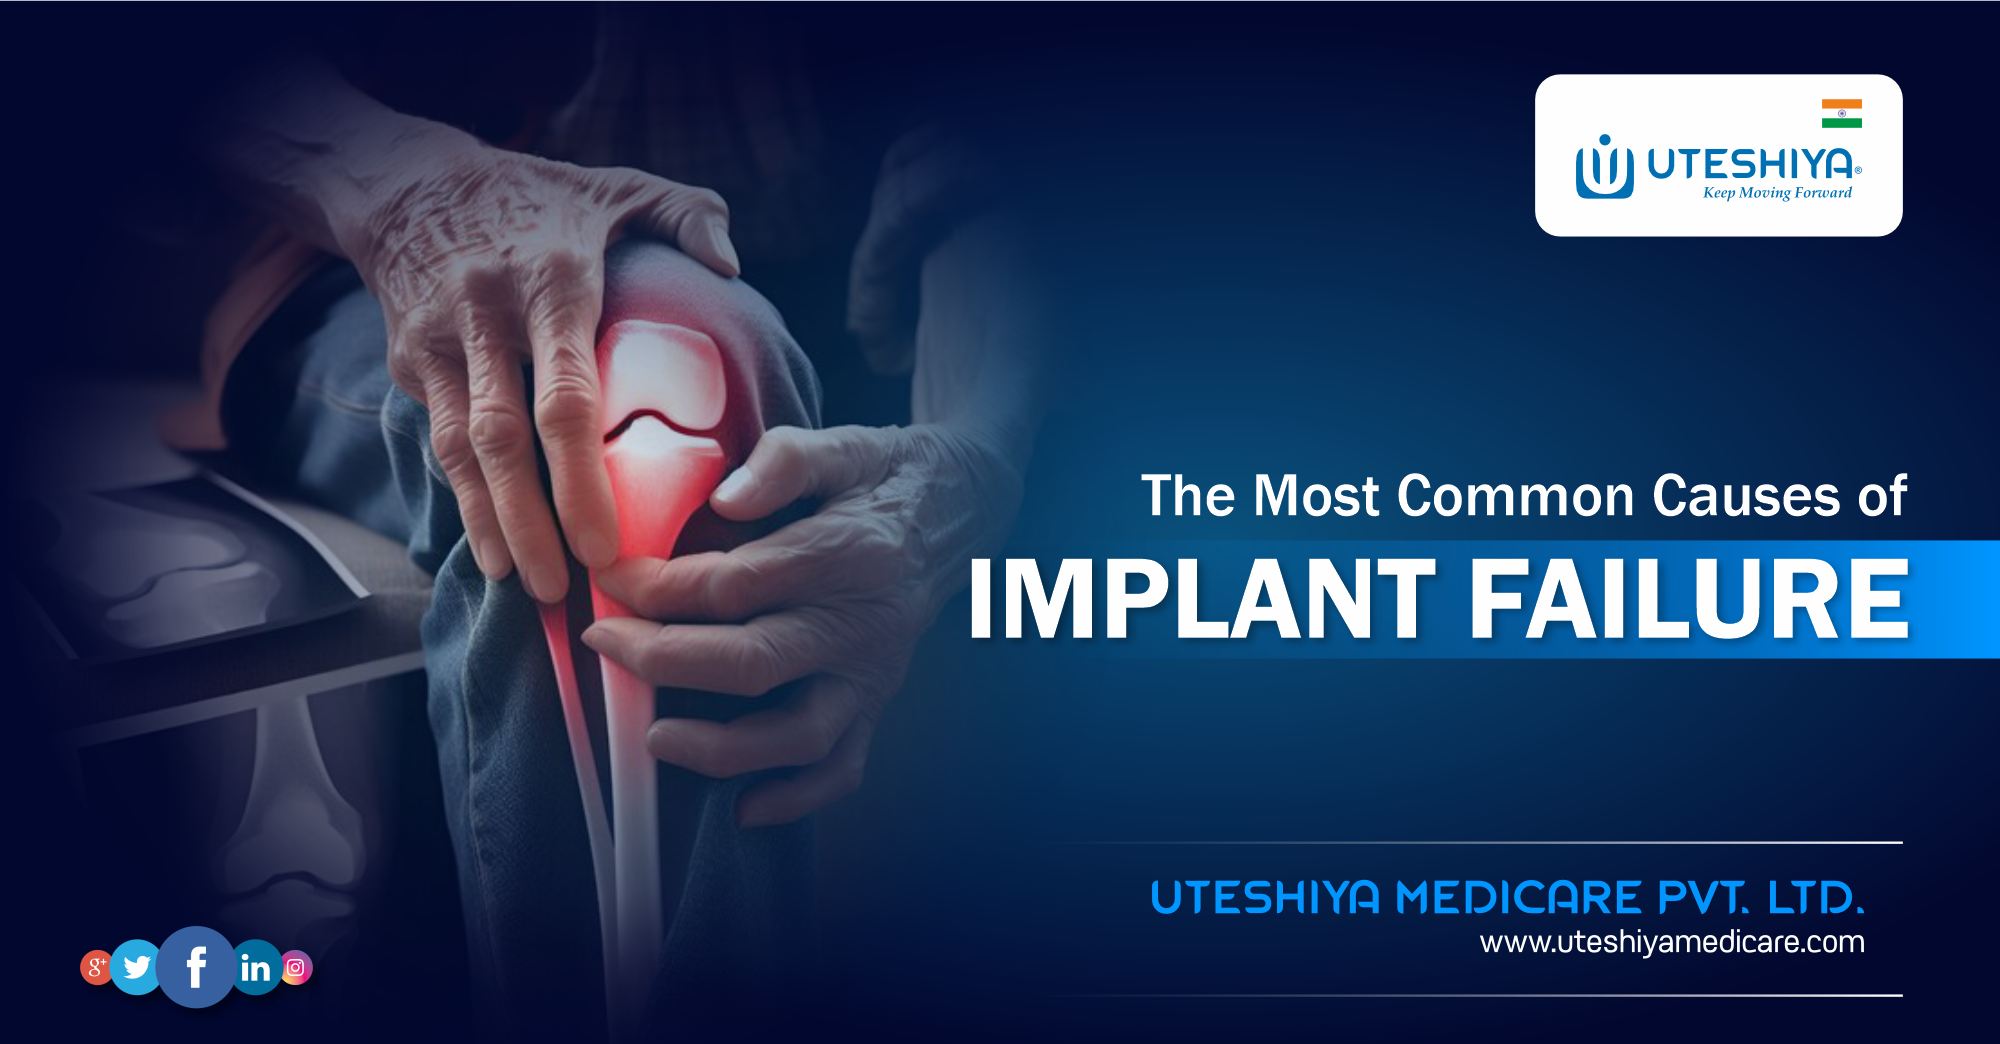 The Most Common Causes of Implant Failure